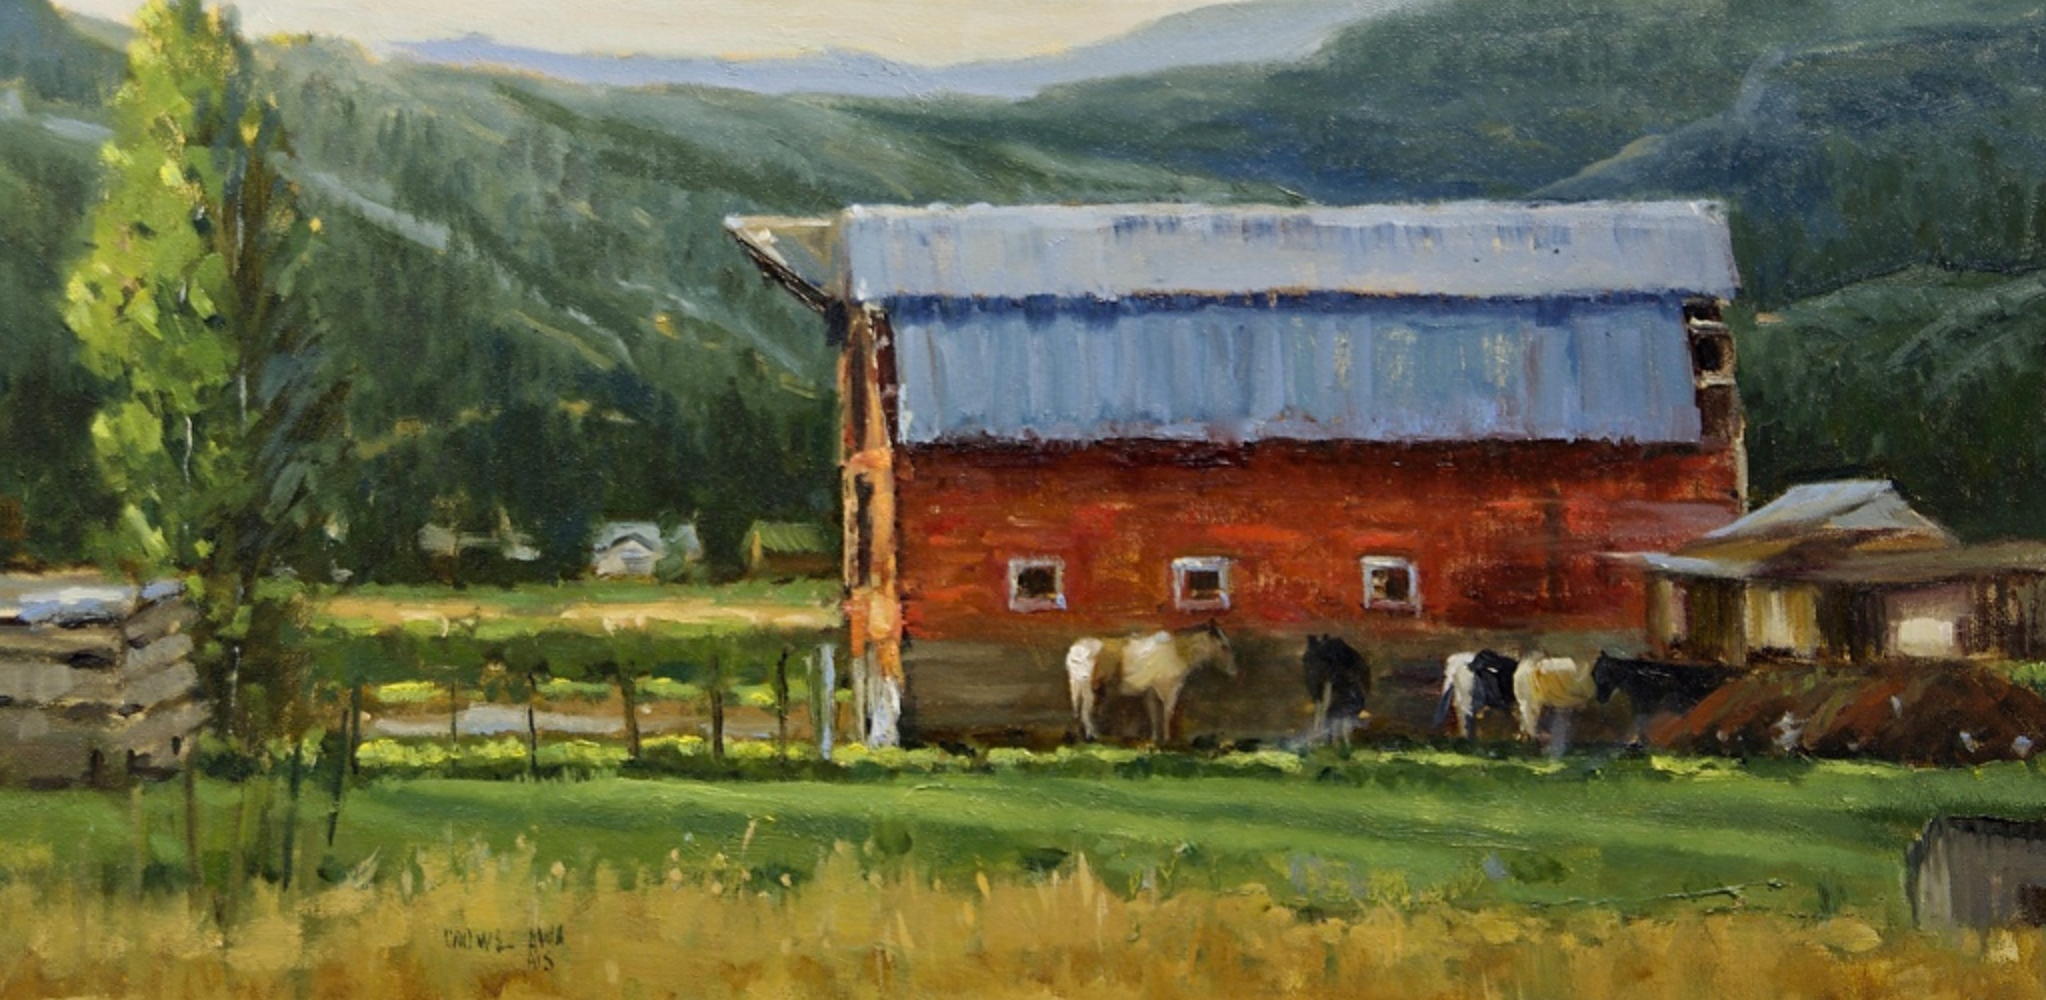 Sunset Suite by Judy Crowe Red Barn scene.png